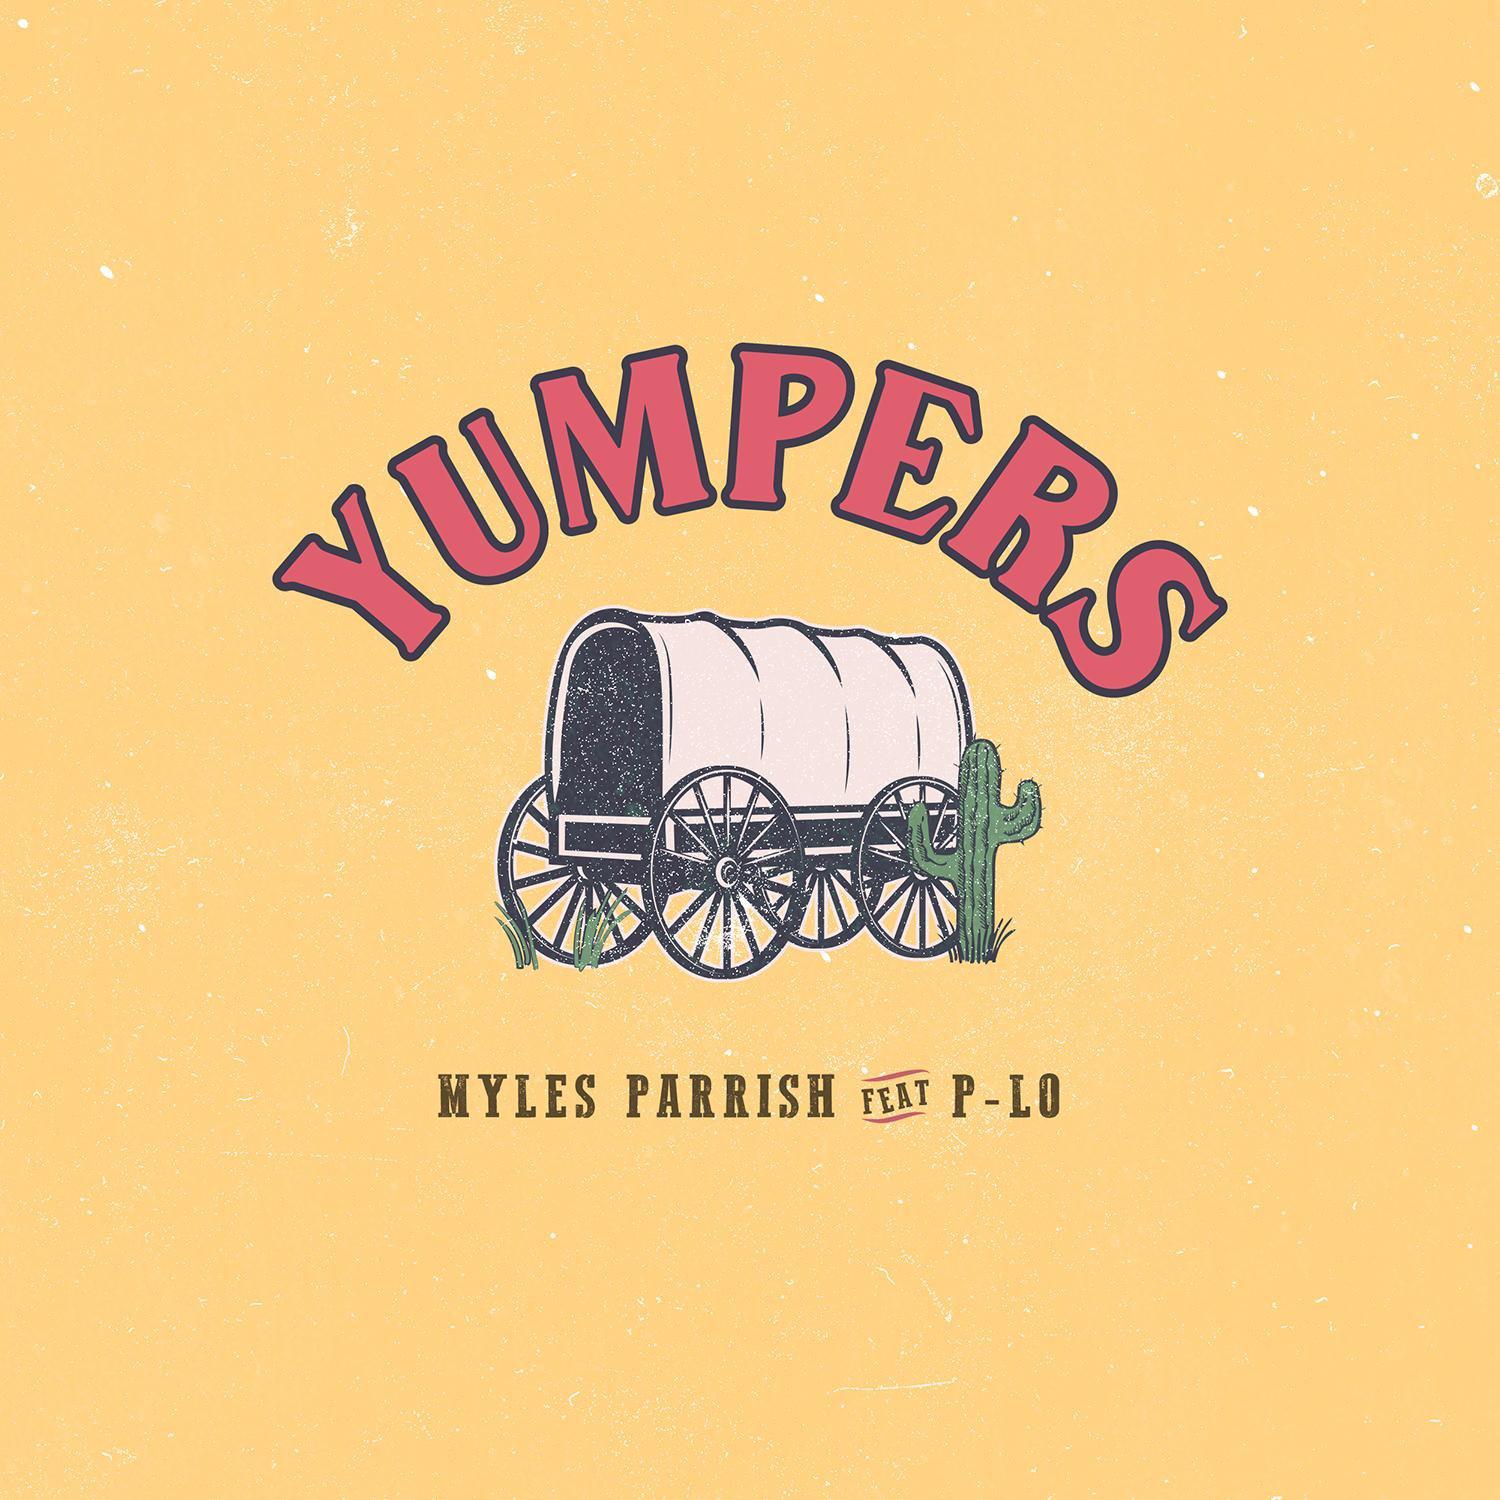 Myles Parrish - Yumpers (feat. P-Lo)